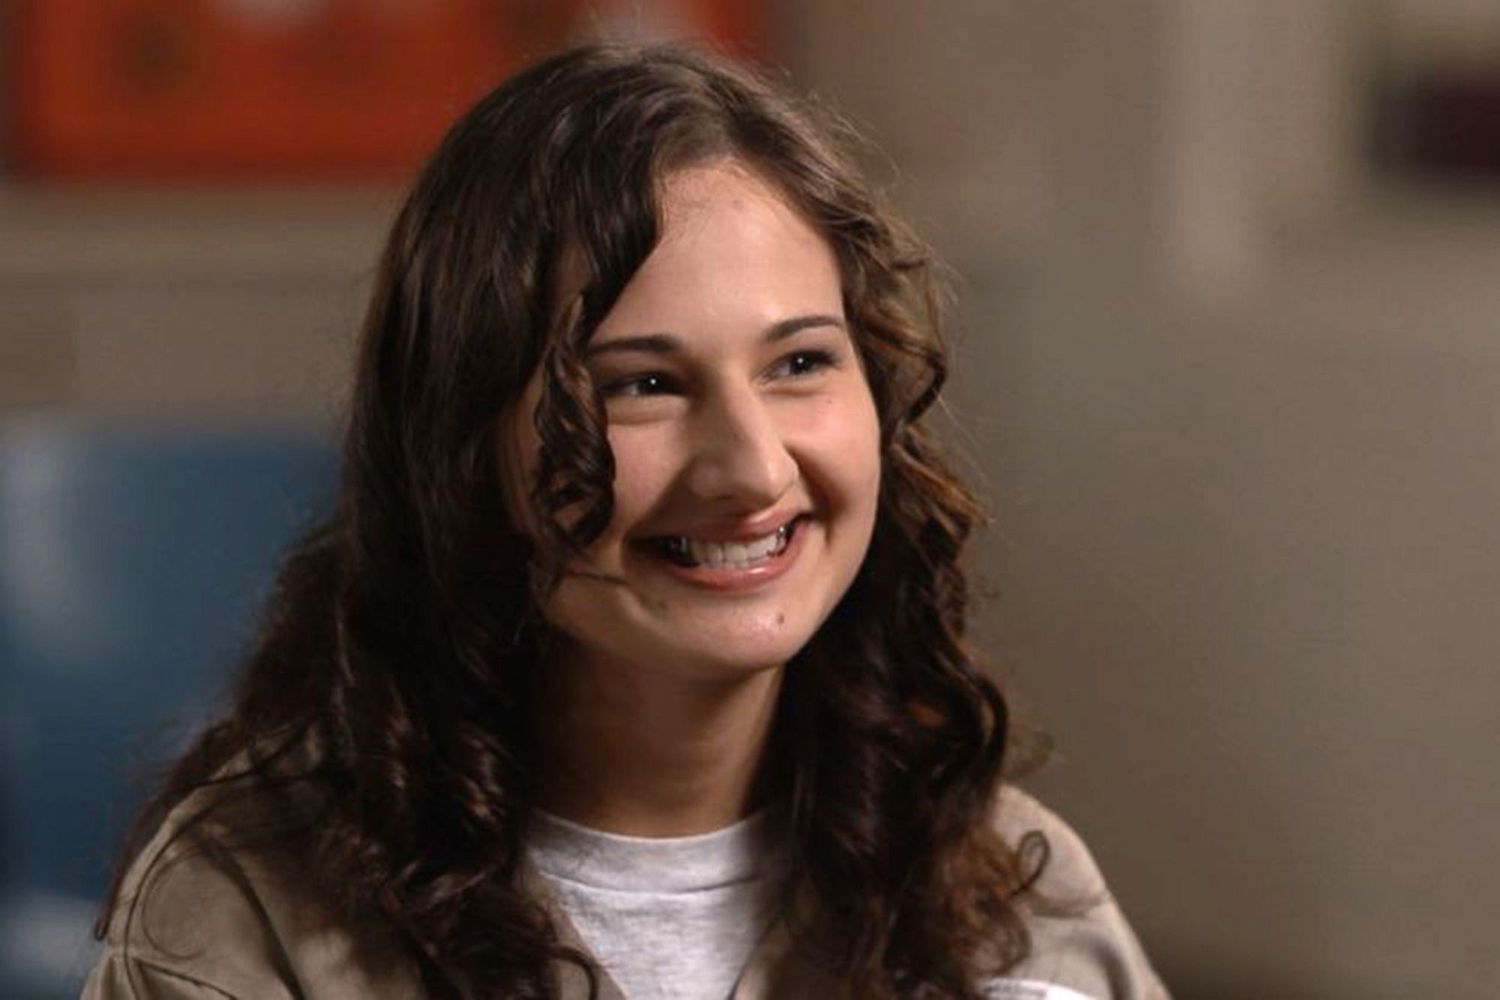 Gypsy Rose Blanchard Prohibited From Contacting Ex-Boyfriend While On Parole